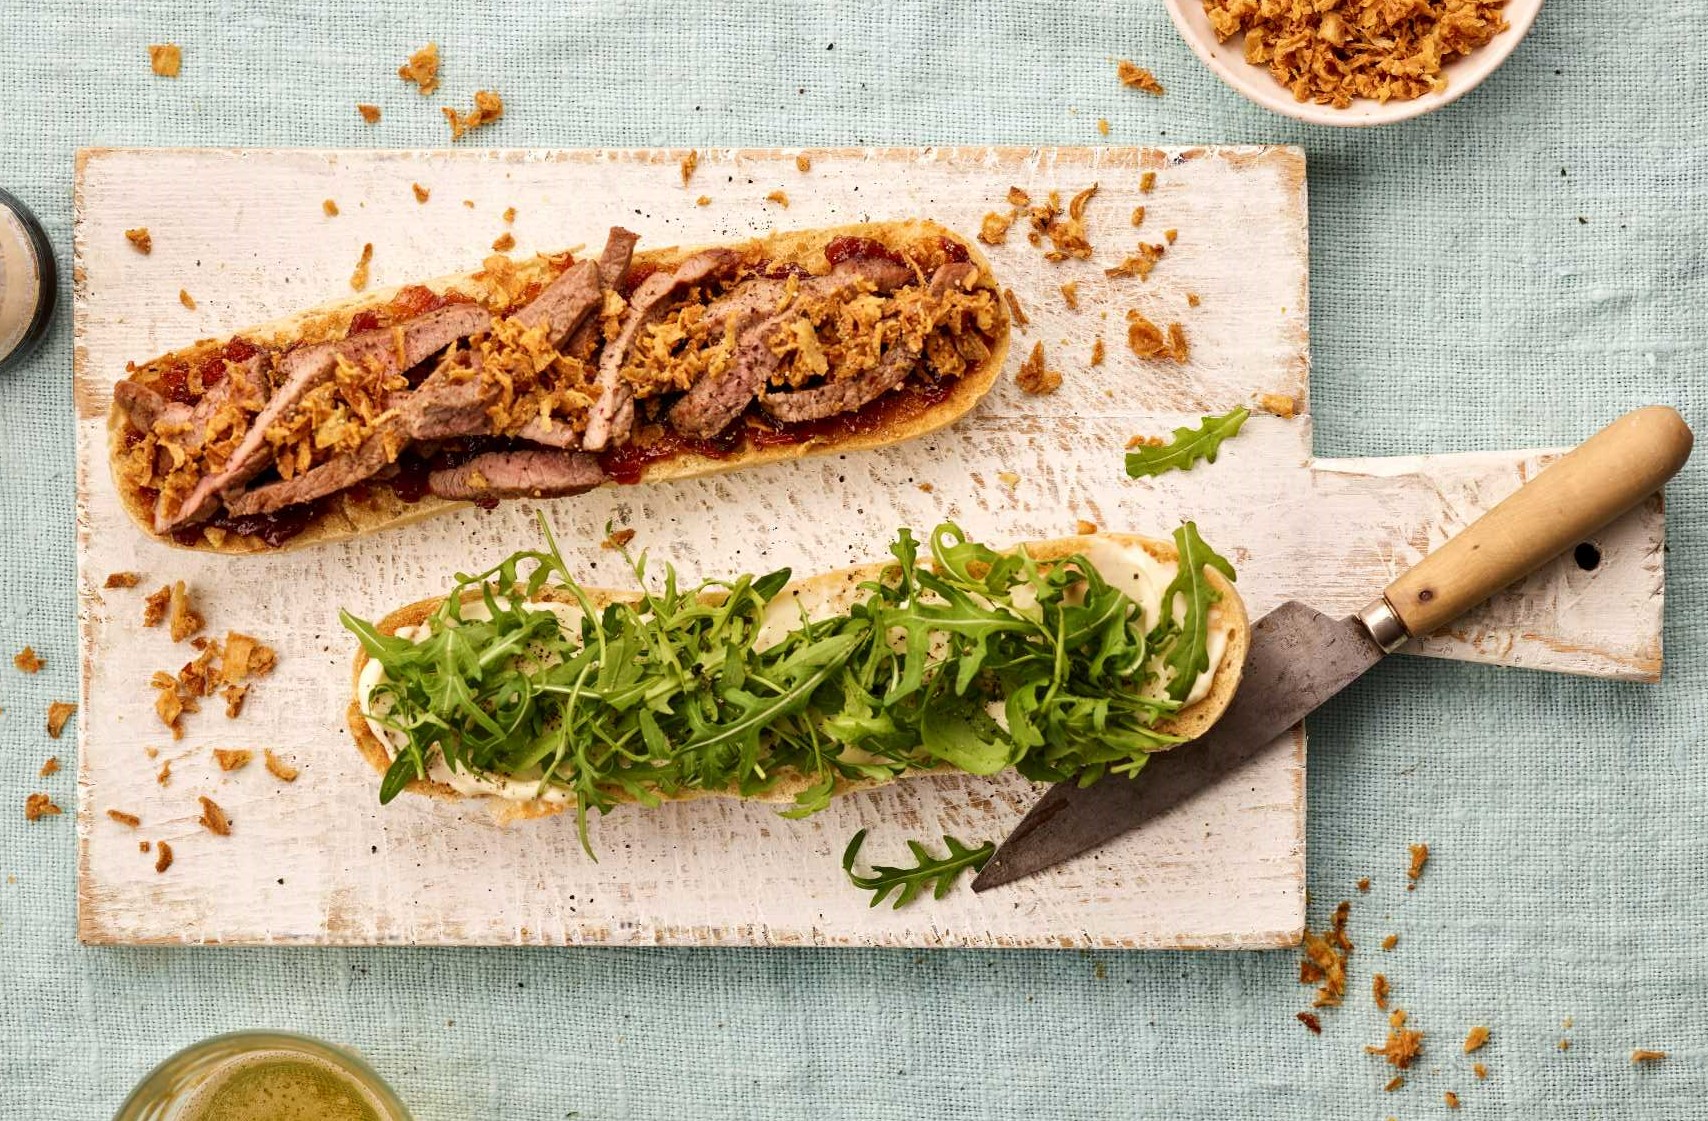 Rose Veal Minute Steak Baguette with Chutney